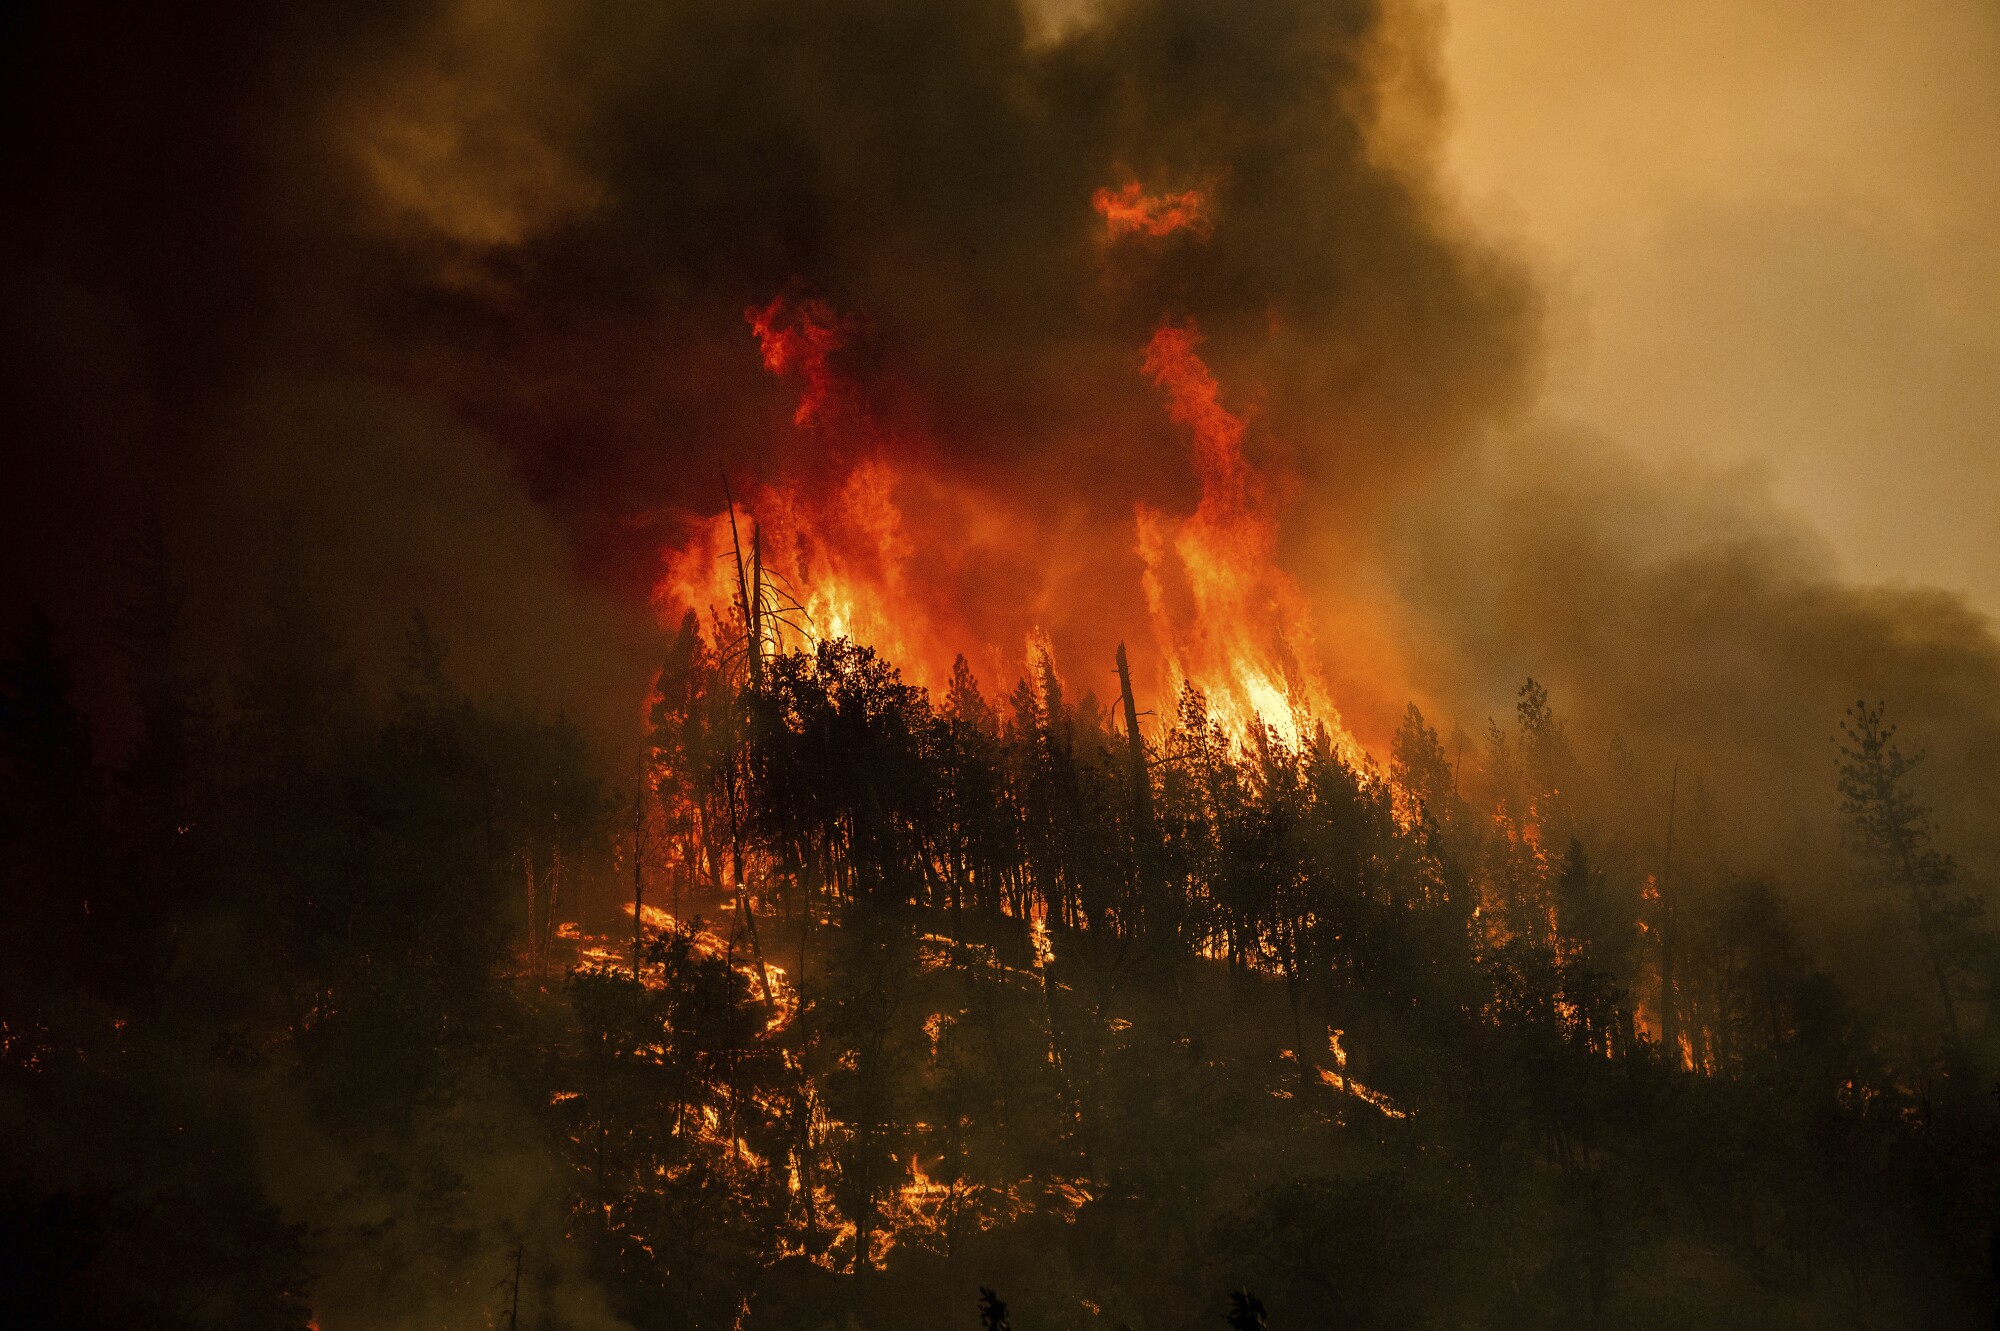 Trees go up in flames from a wildfire